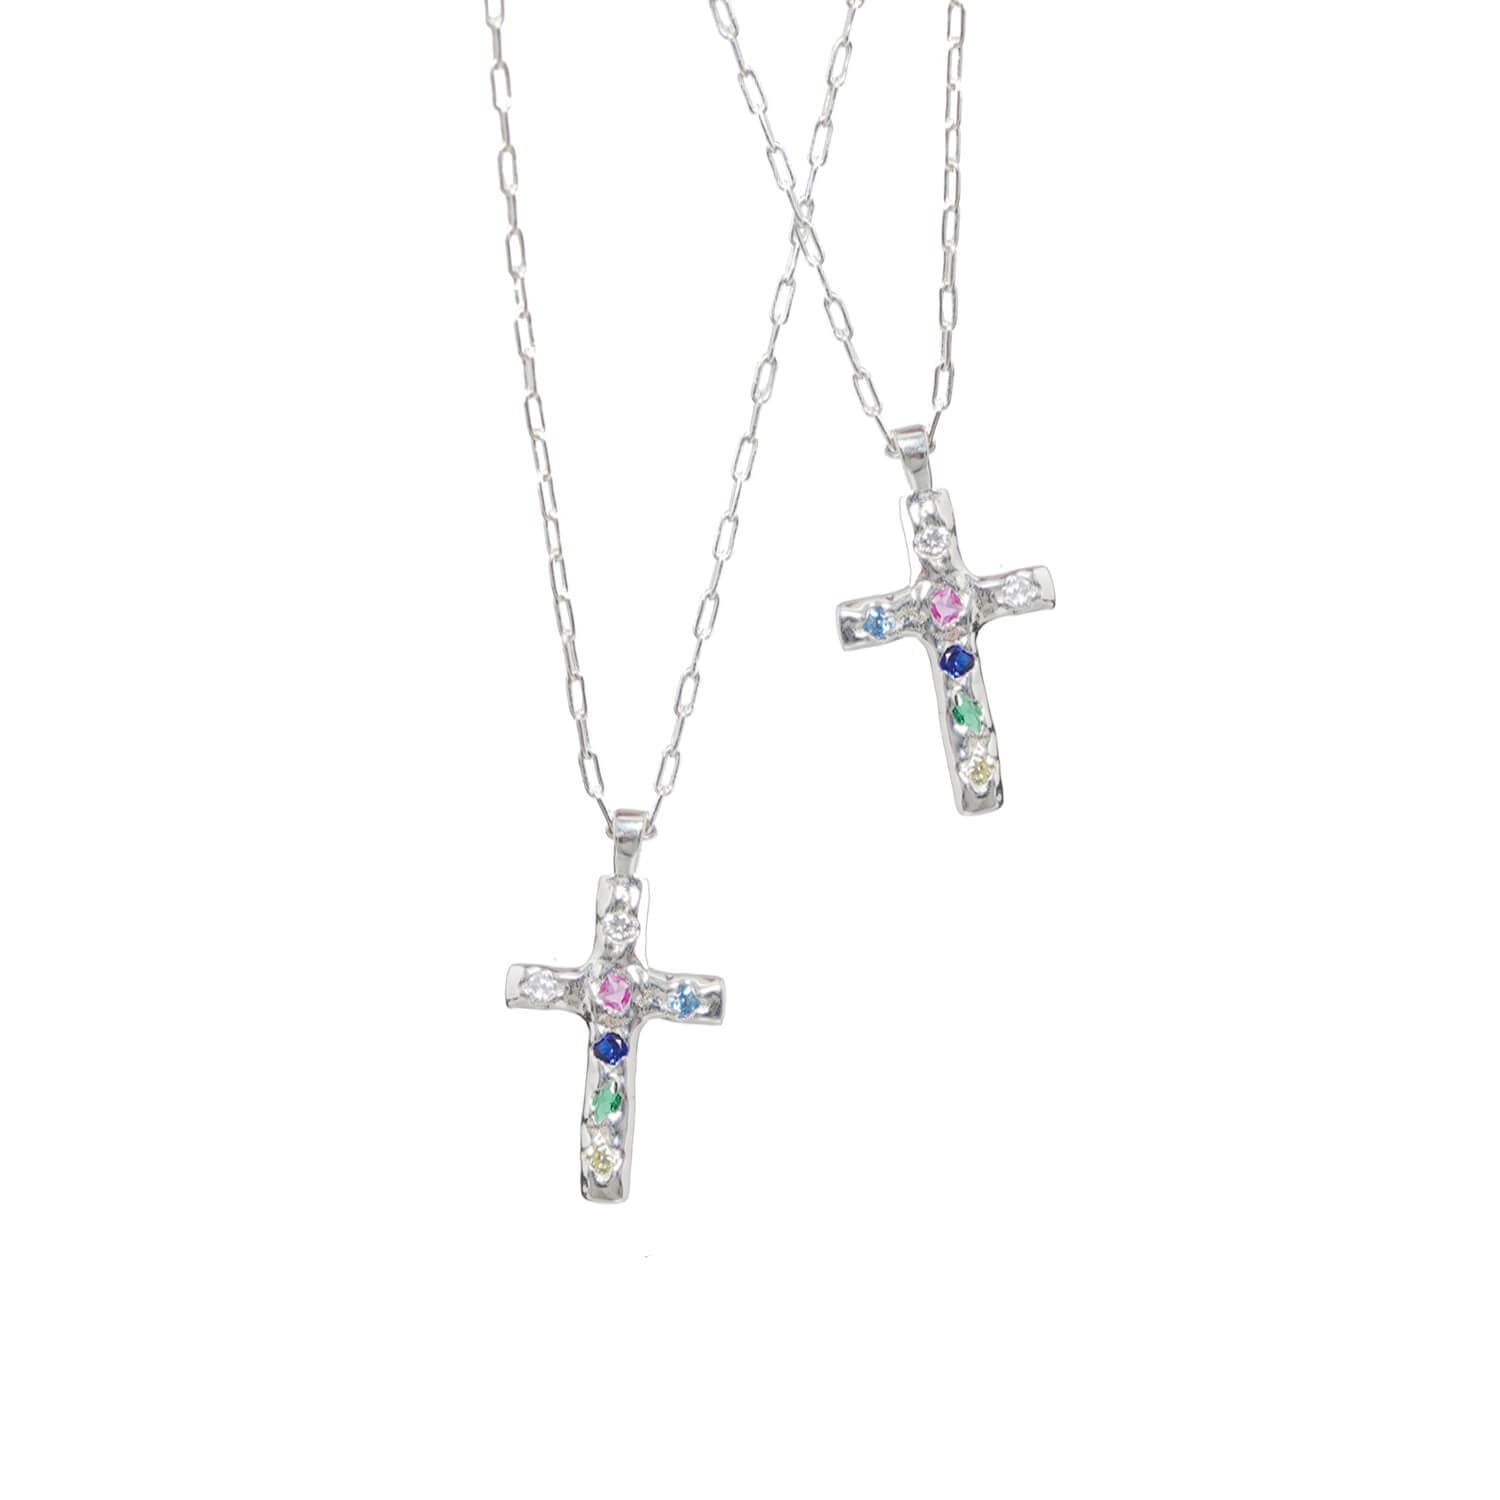 Silver Cross Necklace with Zircon Inlay | Buy at Khanie